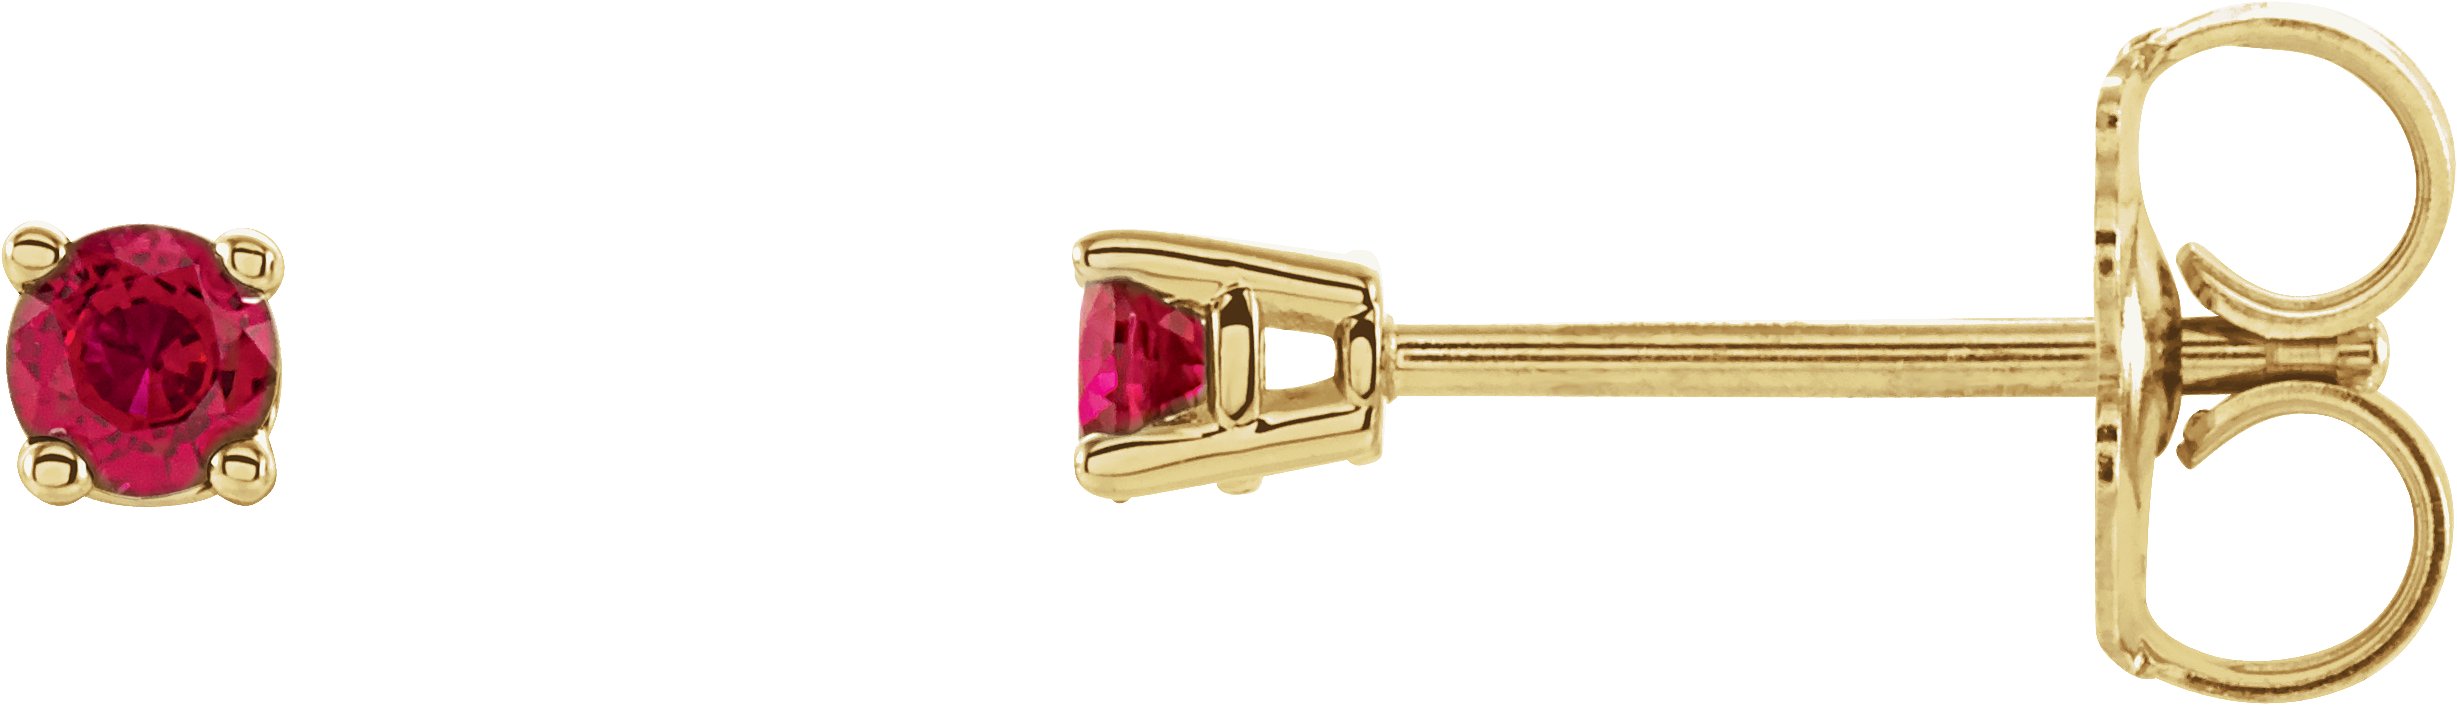 14K Yellow 2.5 mm Natural Ruby Stud Earrings with Friction Post